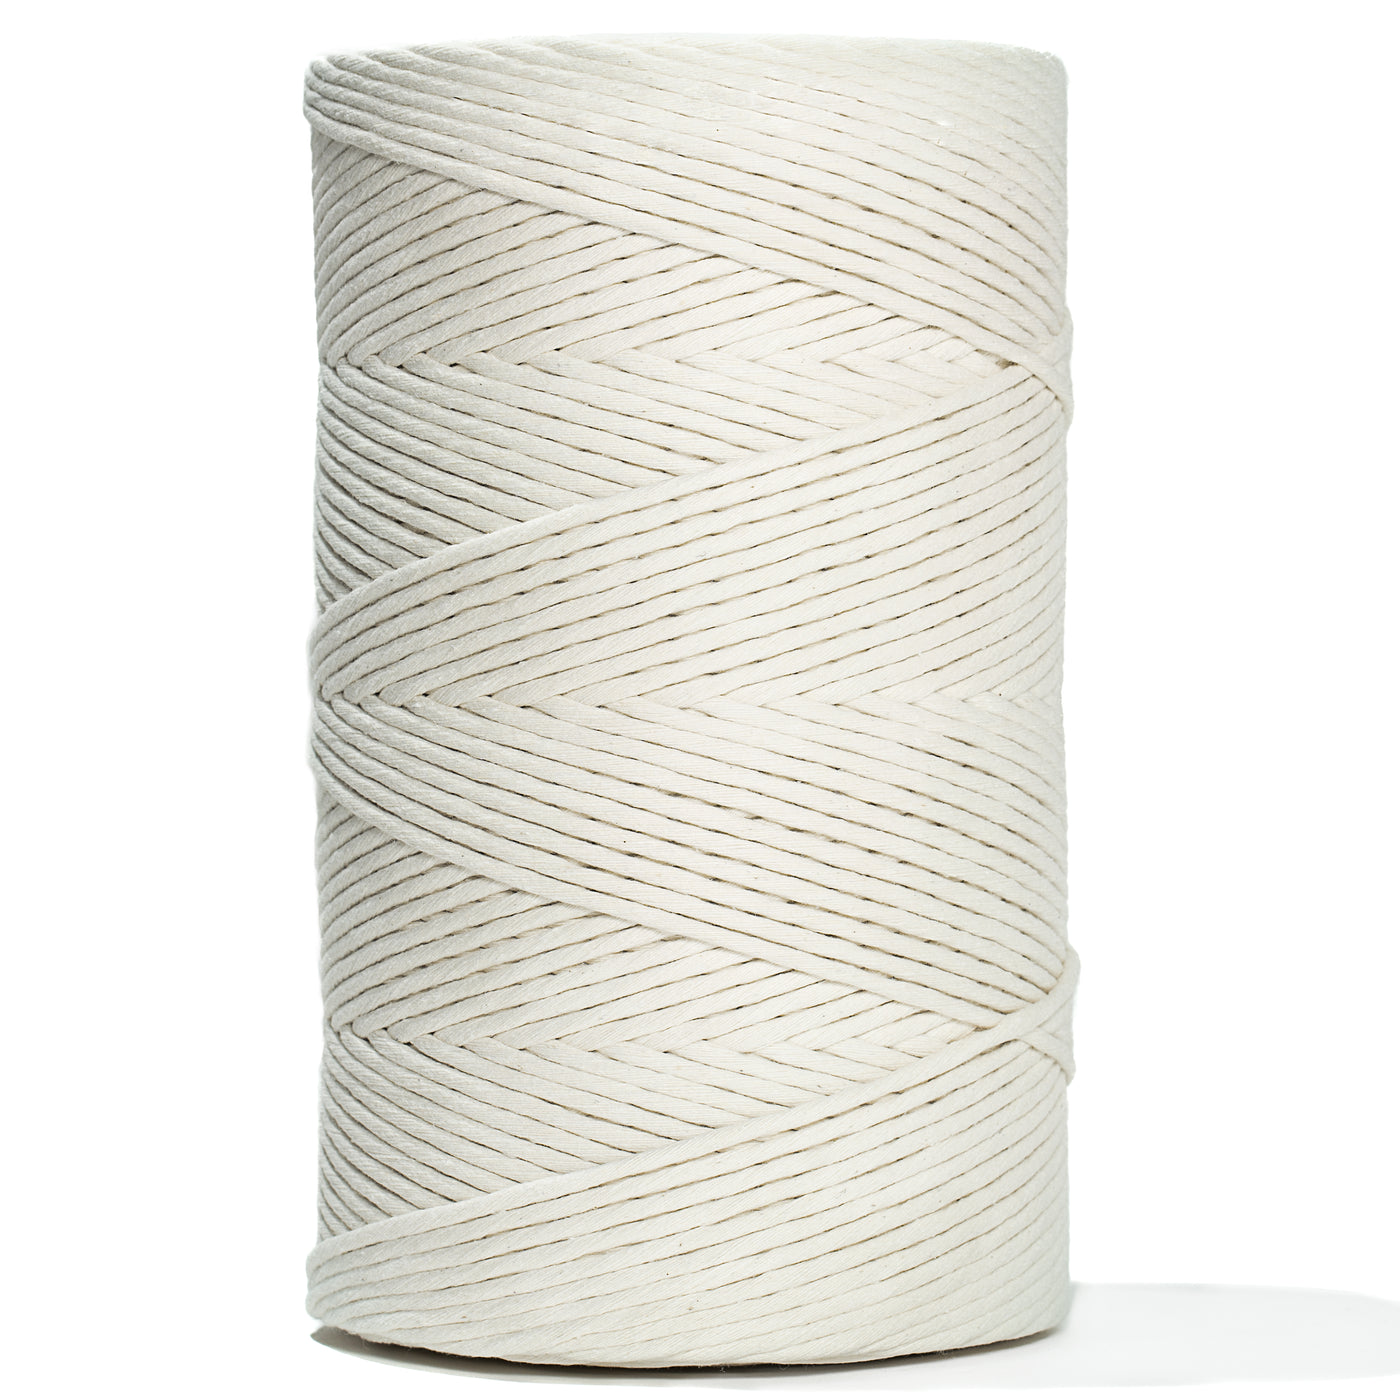 Braided Cotton Rope 3 mm (8 strands)